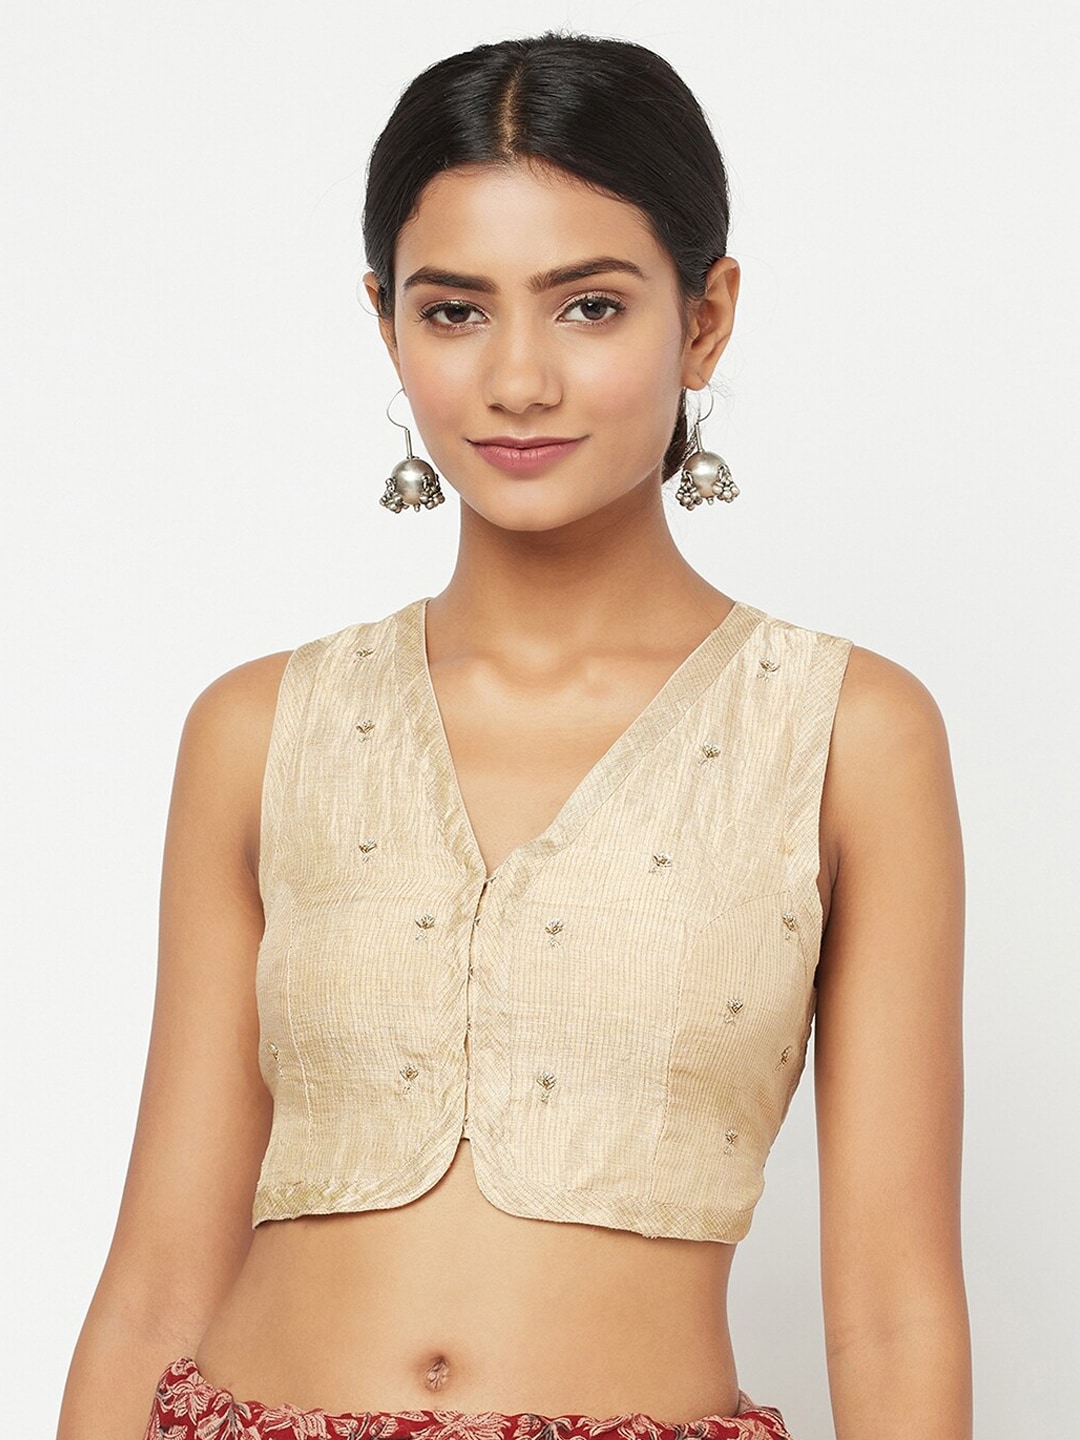 Fabindia Women Beige Embroidered Saree Blouse Price in India